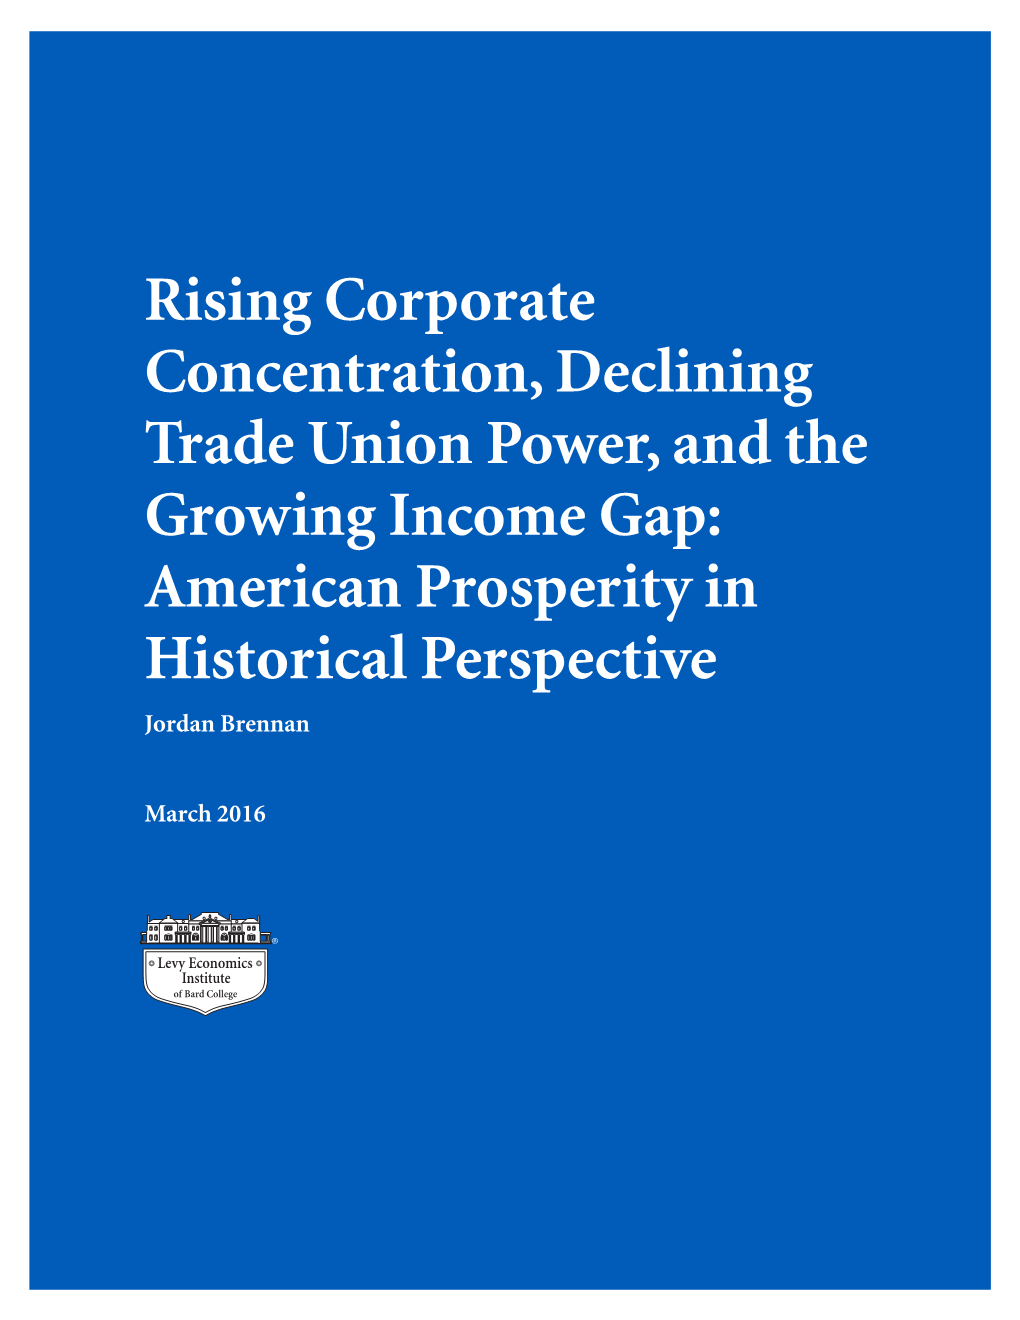 Rising Corporate Concentration, Declining Trade Union Power, and the Growing Income Gap: American Prosperity in Historical Perspective Jordan Brennan